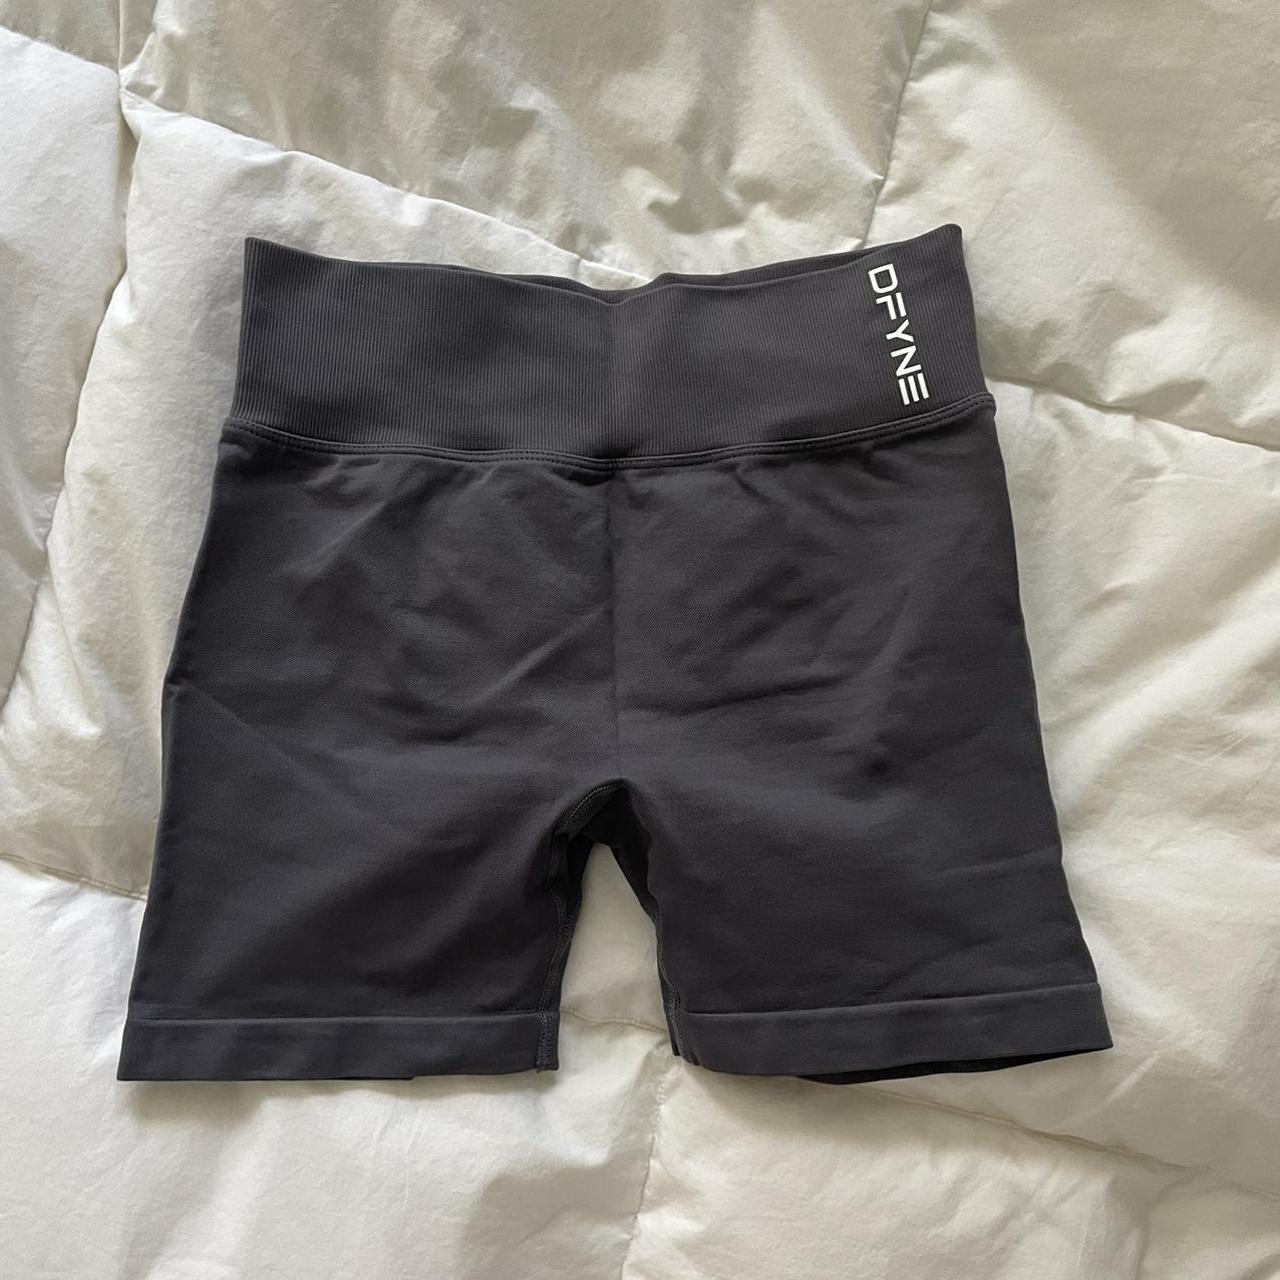 Dfyne charcoal grey shorts Brand new no tags Size... - Depop